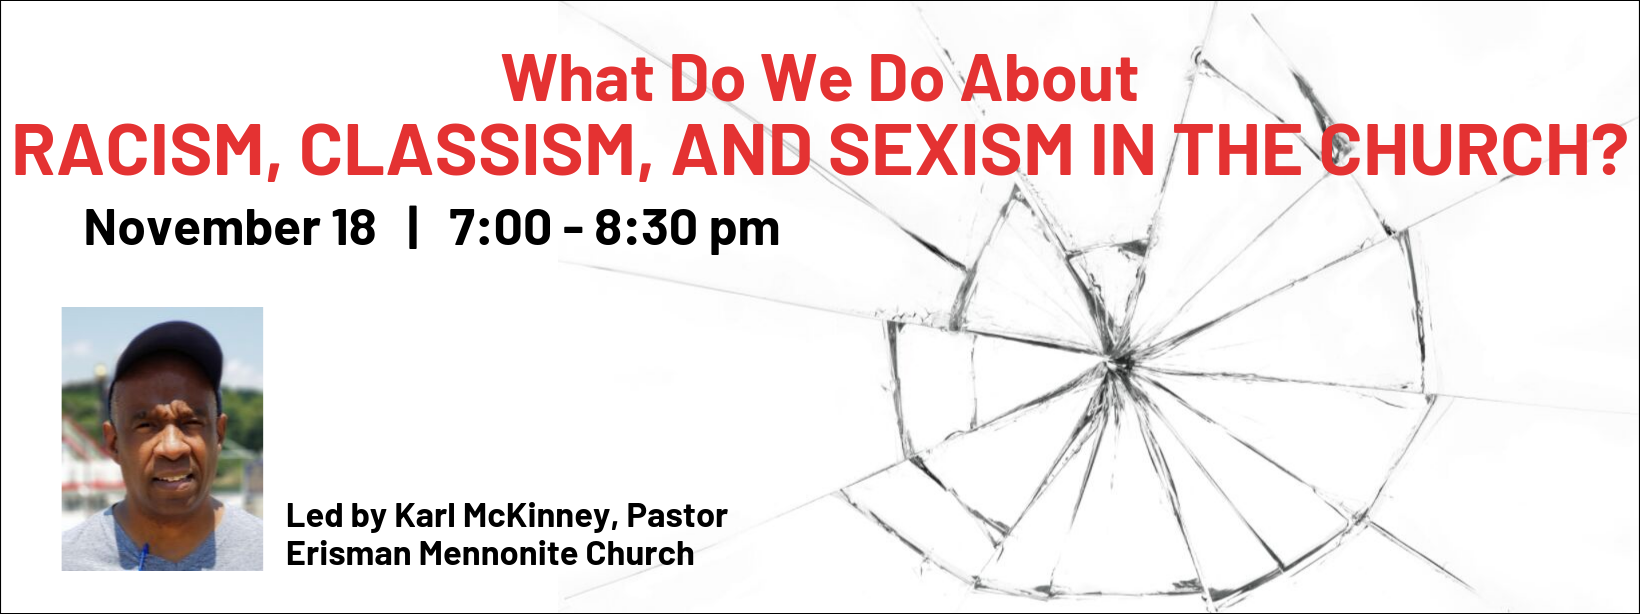 What Do We Do About Racism, Classism, and Sexism in the Church?